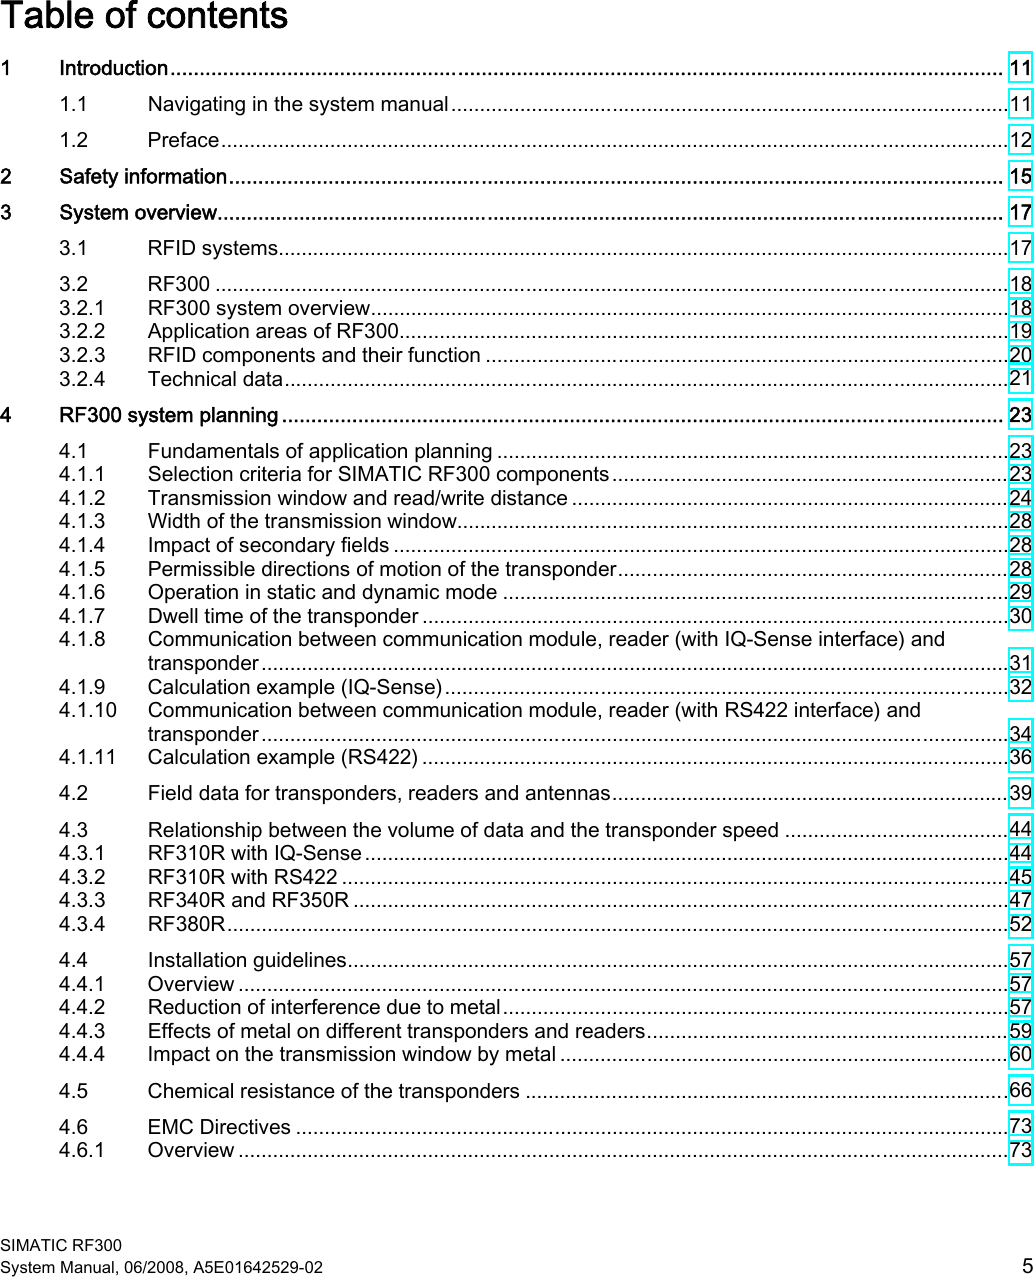  SIMATIC RF300 System Manual, 06/2008, A5E01642529-02  5 Table of contents 1  Introduction.............................................................................................................................................. 11 1.1  Navigating in the system manual.................................................................................................11 1.2  Preface.........................................................................................................................................12 2  Safety information.................................................................................................................................... 15 3  System overview...................................................................................................................................... 17 3.1  RFID systems...............................................................................................................................17 3.2  RF300 ..........................................................................................................................................18 3.2.1  RF300 system overview...............................................................................................................18 3.2.2  Application areas of RF300..........................................................................................................19 3.2.3  RFID components and their function ...........................................................................................20 3.2.4  Technical data..............................................................................................................................21 4  RF300 system planning ........................................................................................................................... 23 4.1  Fundamentals of application planning .........................................................................................23 4.1.1  Selection criteria for SIMATIC RF300 components.....................................................................23 4.1.2  Transmission window and read/write distance ............................................................................24 4.1.3  Width of the transmission window................................................................................................28 4.1.4  Impact of secondary fields ...........................................................................................................28 4.1.5  Permissible directions of motion of the transponder....................................................................28 4.1.6  Operation in static and dynamic mode ........................................................................................29 4.1.7  Dwell time of the transponder ......................................................................................................30 4.1.8  Communication between communication module, reader (with IQ-Sense interface) and transponder..................................................................................................................................31 4.1.9  Calculation example (IQ-Sense)..................................................................................................32 4.1.10  Communication between communication module, reader (with RS422 interface) and transponder..................................................................................................................................34 4.1.11  Calculation example (RS422) ......................................................................................................36 4.2  Field data for transponders, readers and antennas.....................................................................39 4.3  Relationship between the volume of data and the transponder speed .......................................44 4.3.1  RF310R with IQ-Sense ................................................................................................................44 4.3.2  RF310R with RS422 ....................................................................................................................45 4.3.3  RF340R and RF350R ..................................................................................................................47 4.3.4  RF380R........................................................................................................................................52 4.4  Installation guidelines...................................................................................................................57 4.4.1  Overview ......................................................................................................................................57 4.4.2  Reduction of interference due to metal........................................................................................57 4.4.3  Effects of metal on different transponders and readers...............................................................59 4.4.4  Impact on the transmission window by metal ..............................................................................60 4.5  Chemical resistance of the transponders ....................................................................................66 4.6  EMC Directives ............................................................................................................................73 4.6.1  Overview ......................................................................................................................................73 